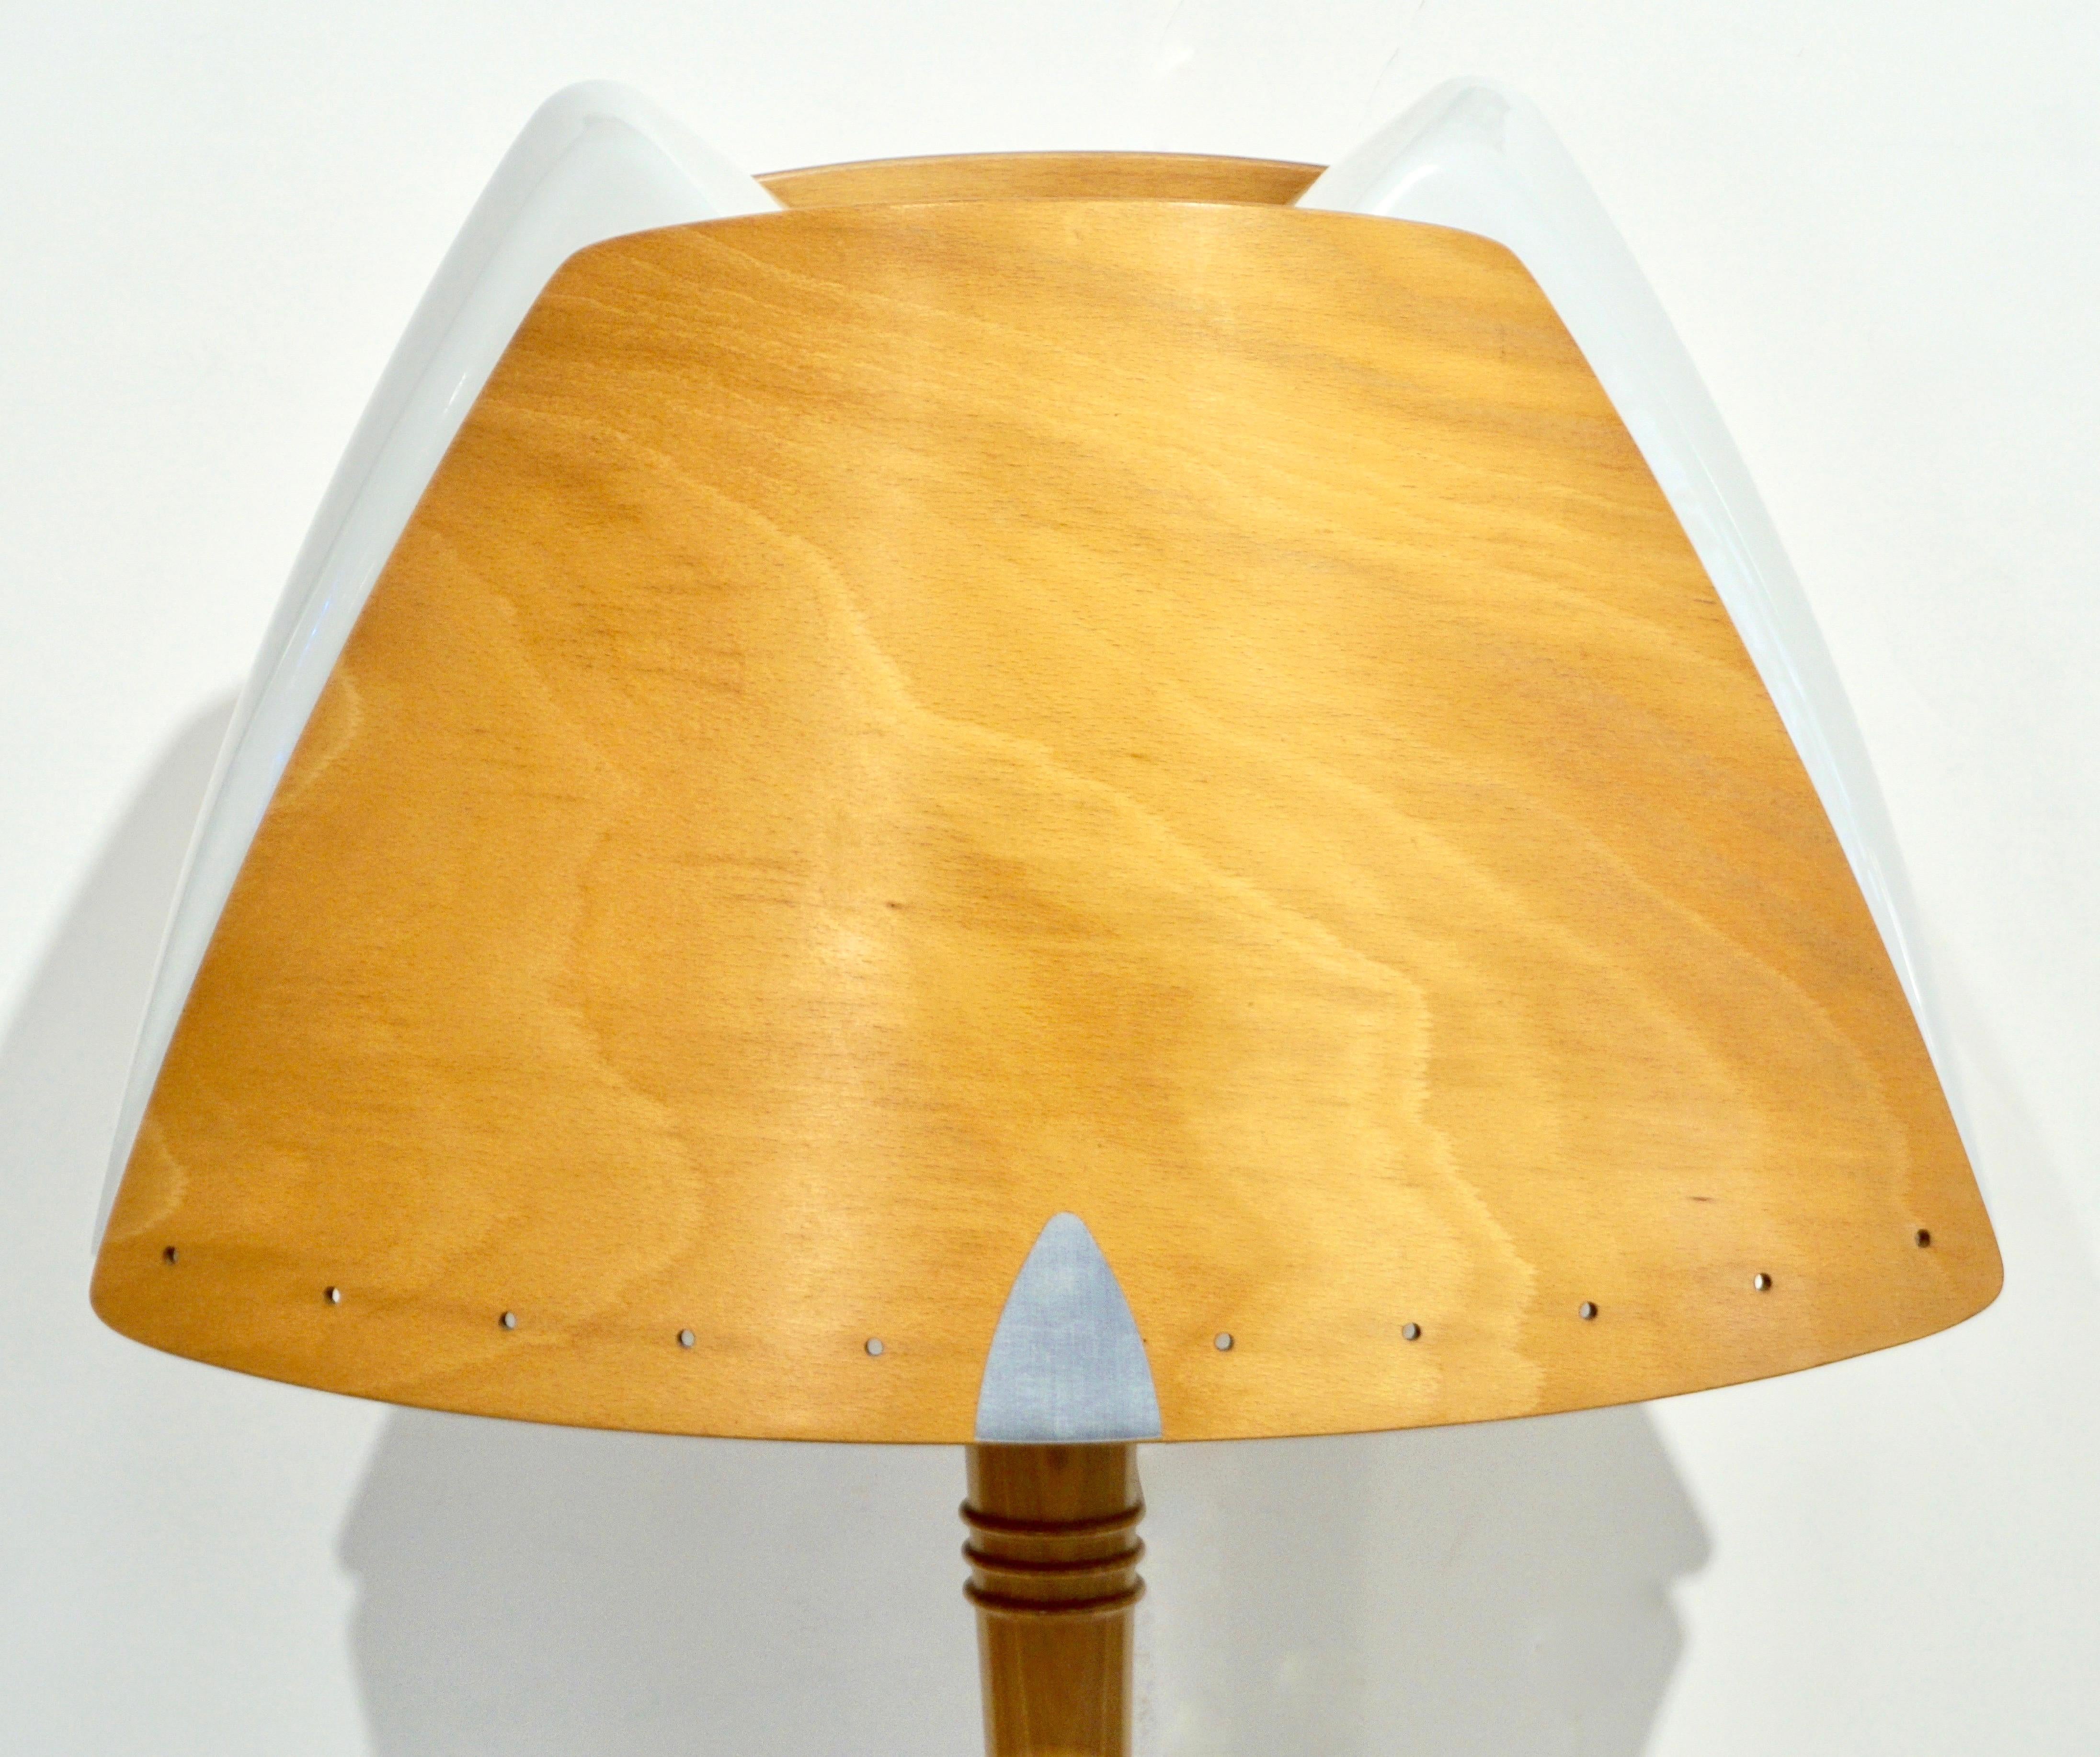 1970 French Vintage Birch Wood and Acrylic Table Lamp for Barcelona Hilton Hotel For Sale 6